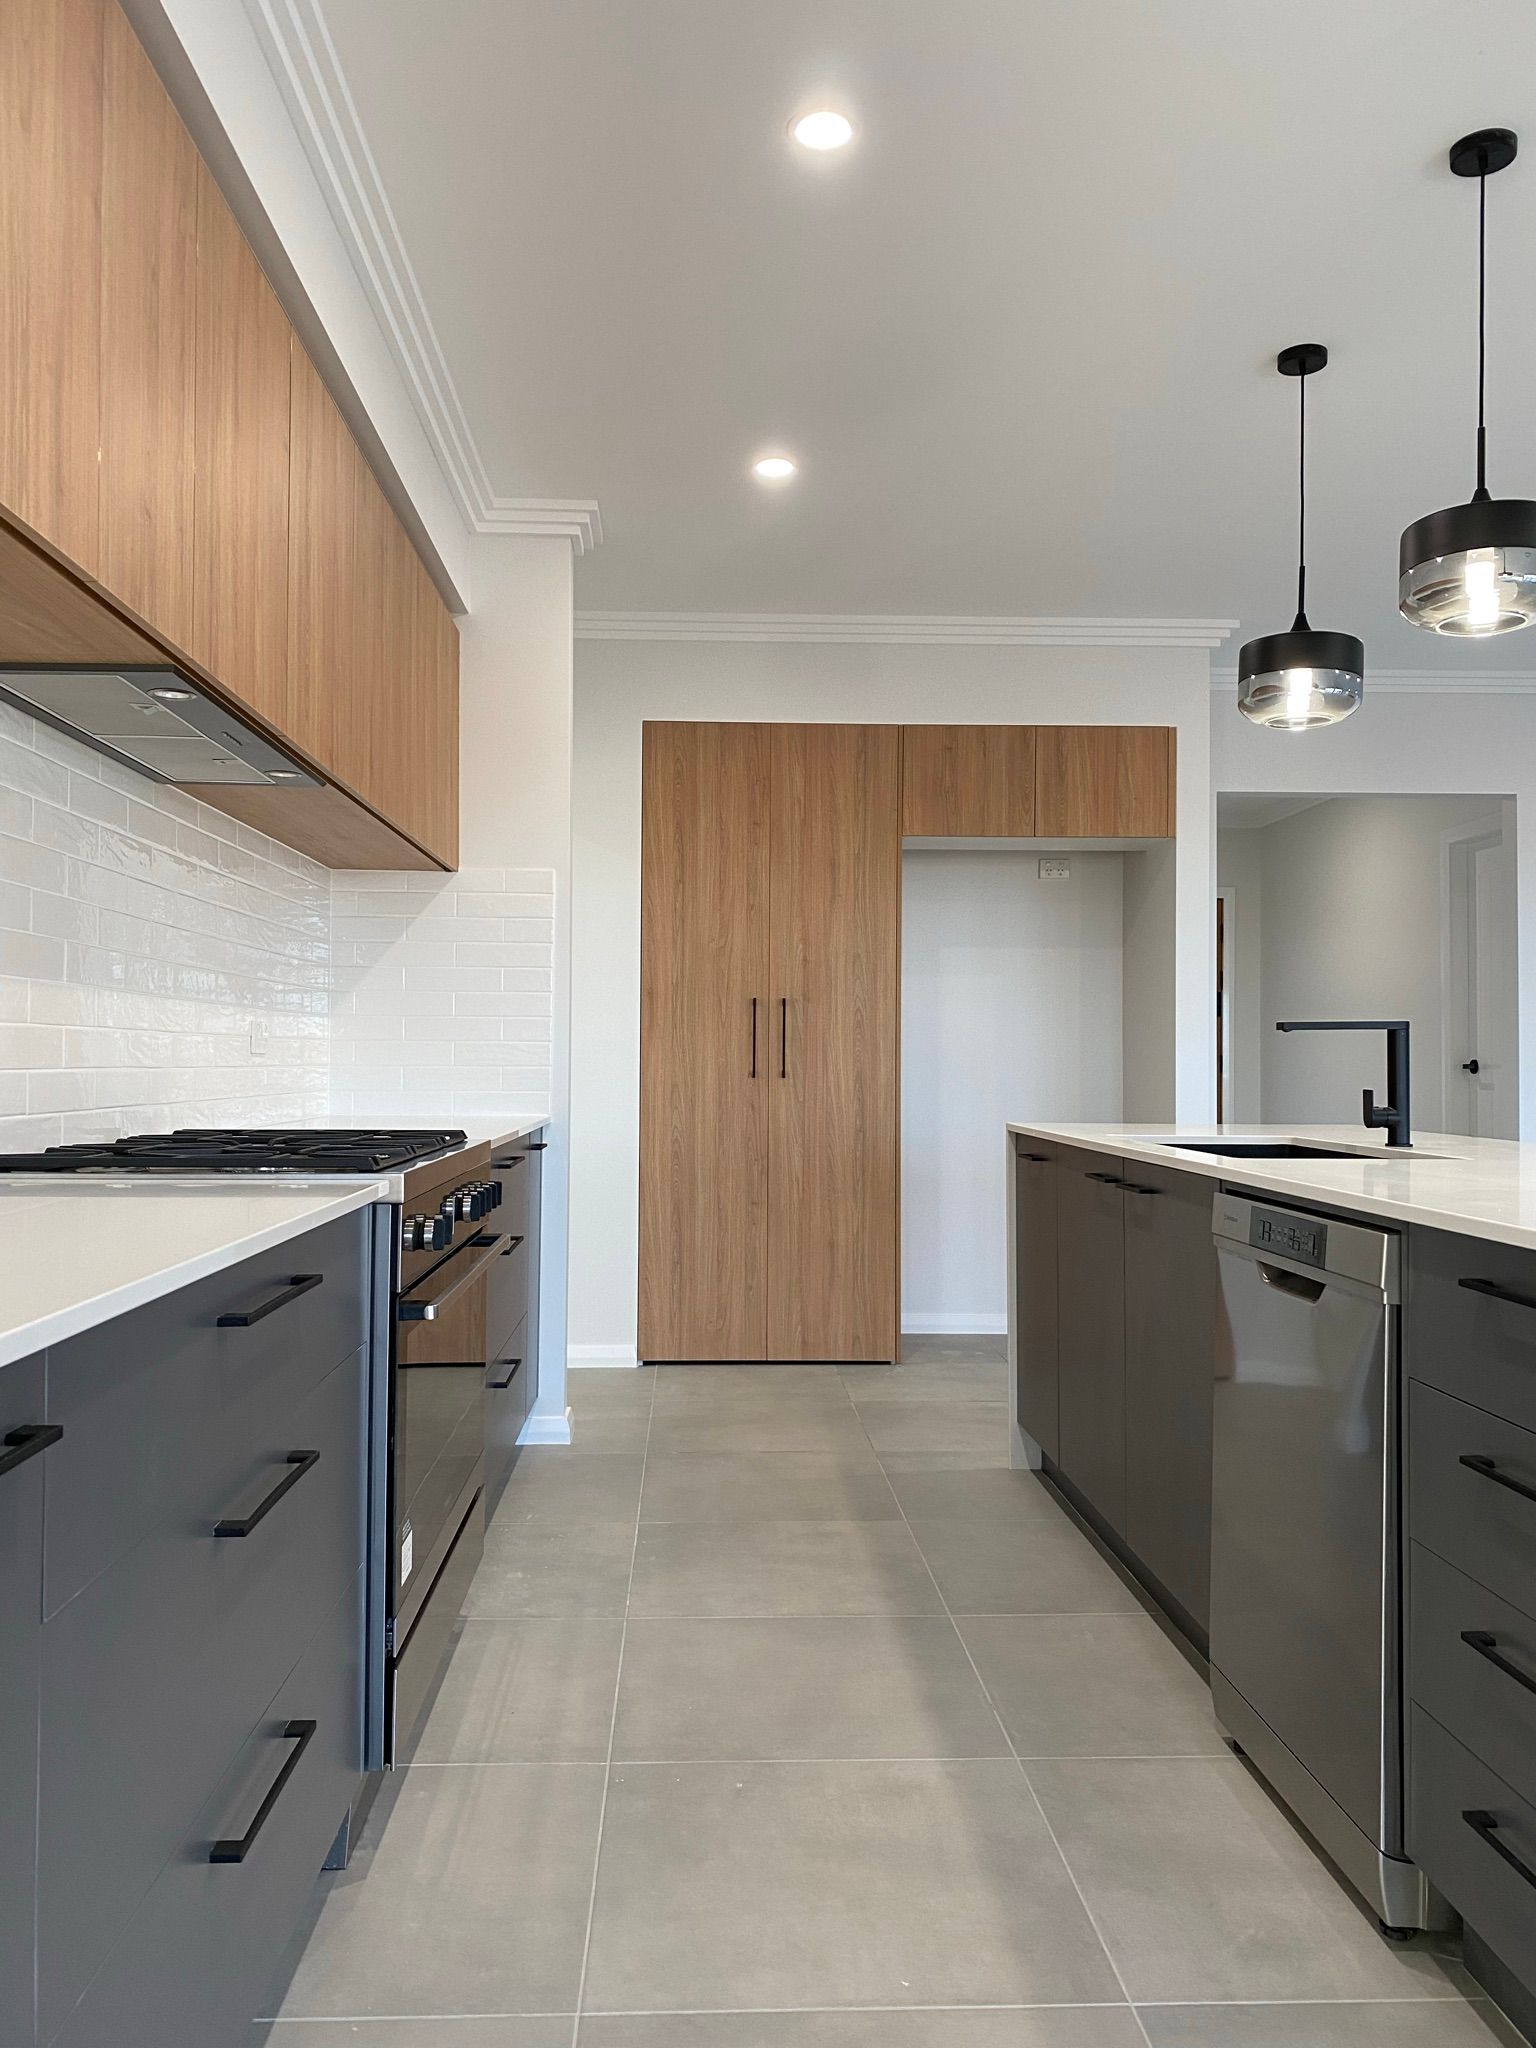 Photo of a Modern Style Kitchen — Kitchen Renovations in Dubbo, QLD